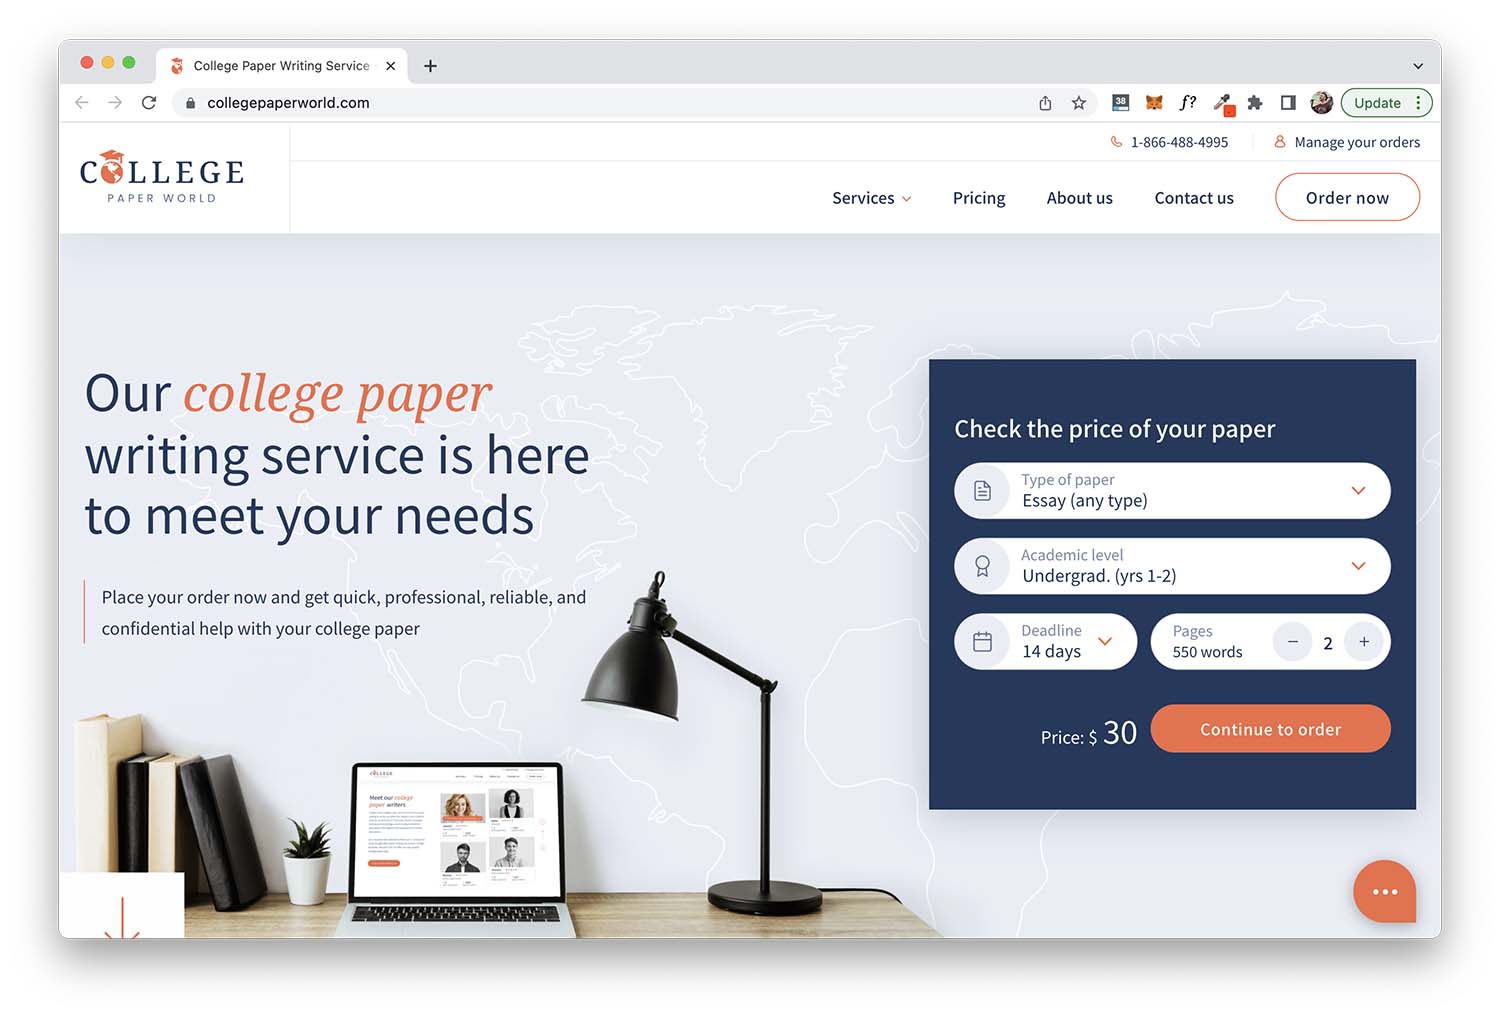 College Paper World - the most preferred writing service among college students